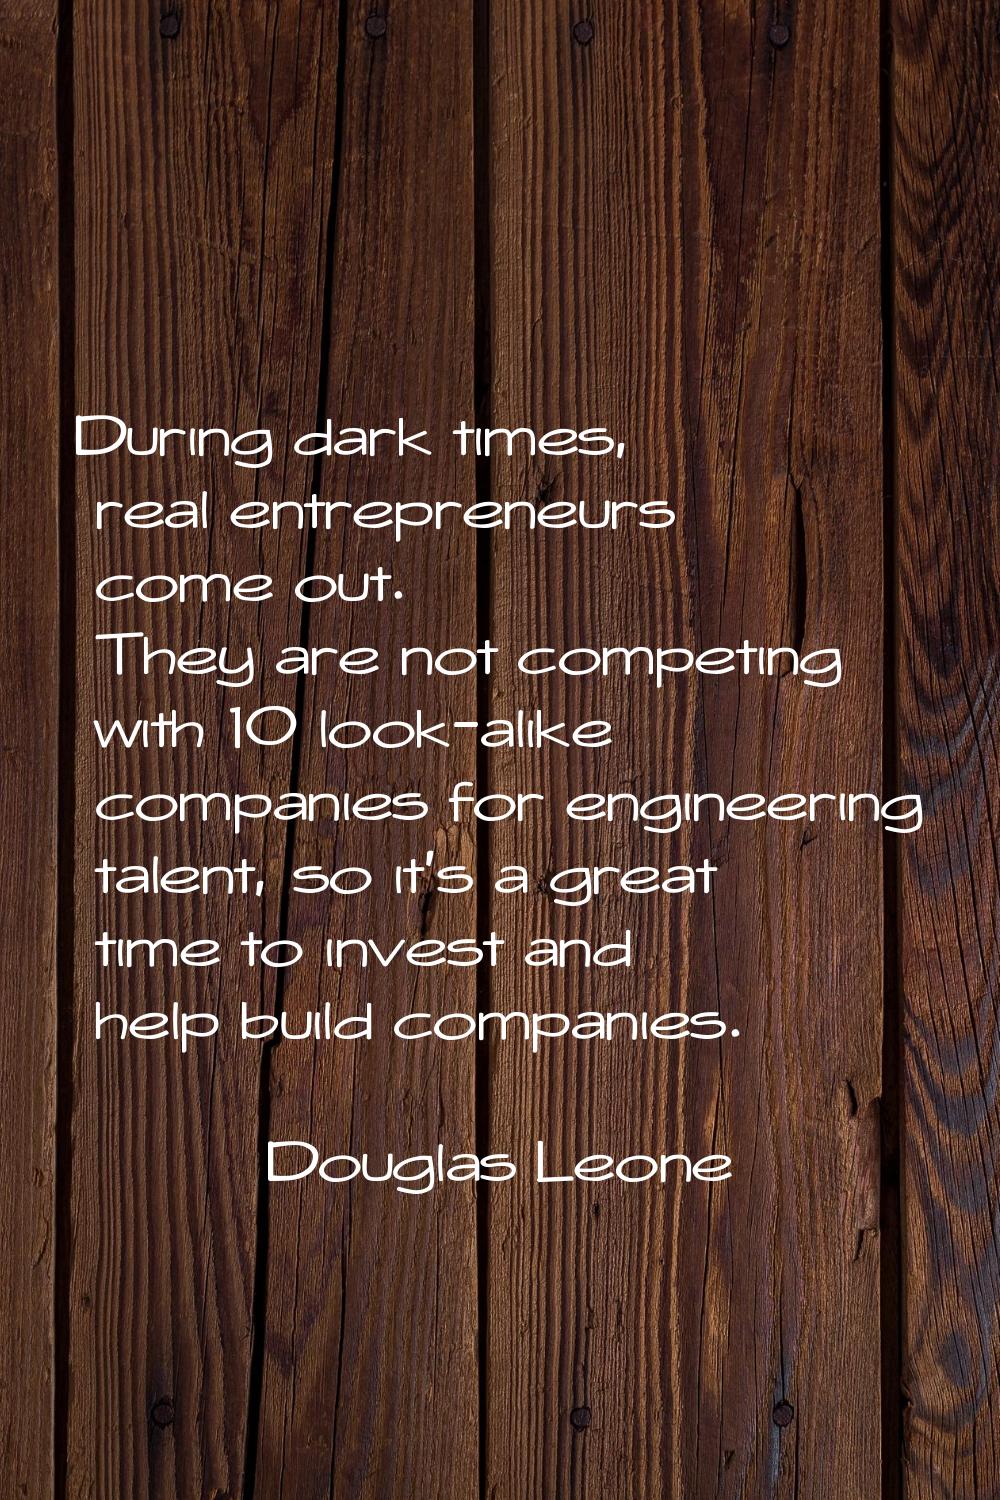 During dark times, real entrepreneurs come out. They are not competing with 10 look-alike companies